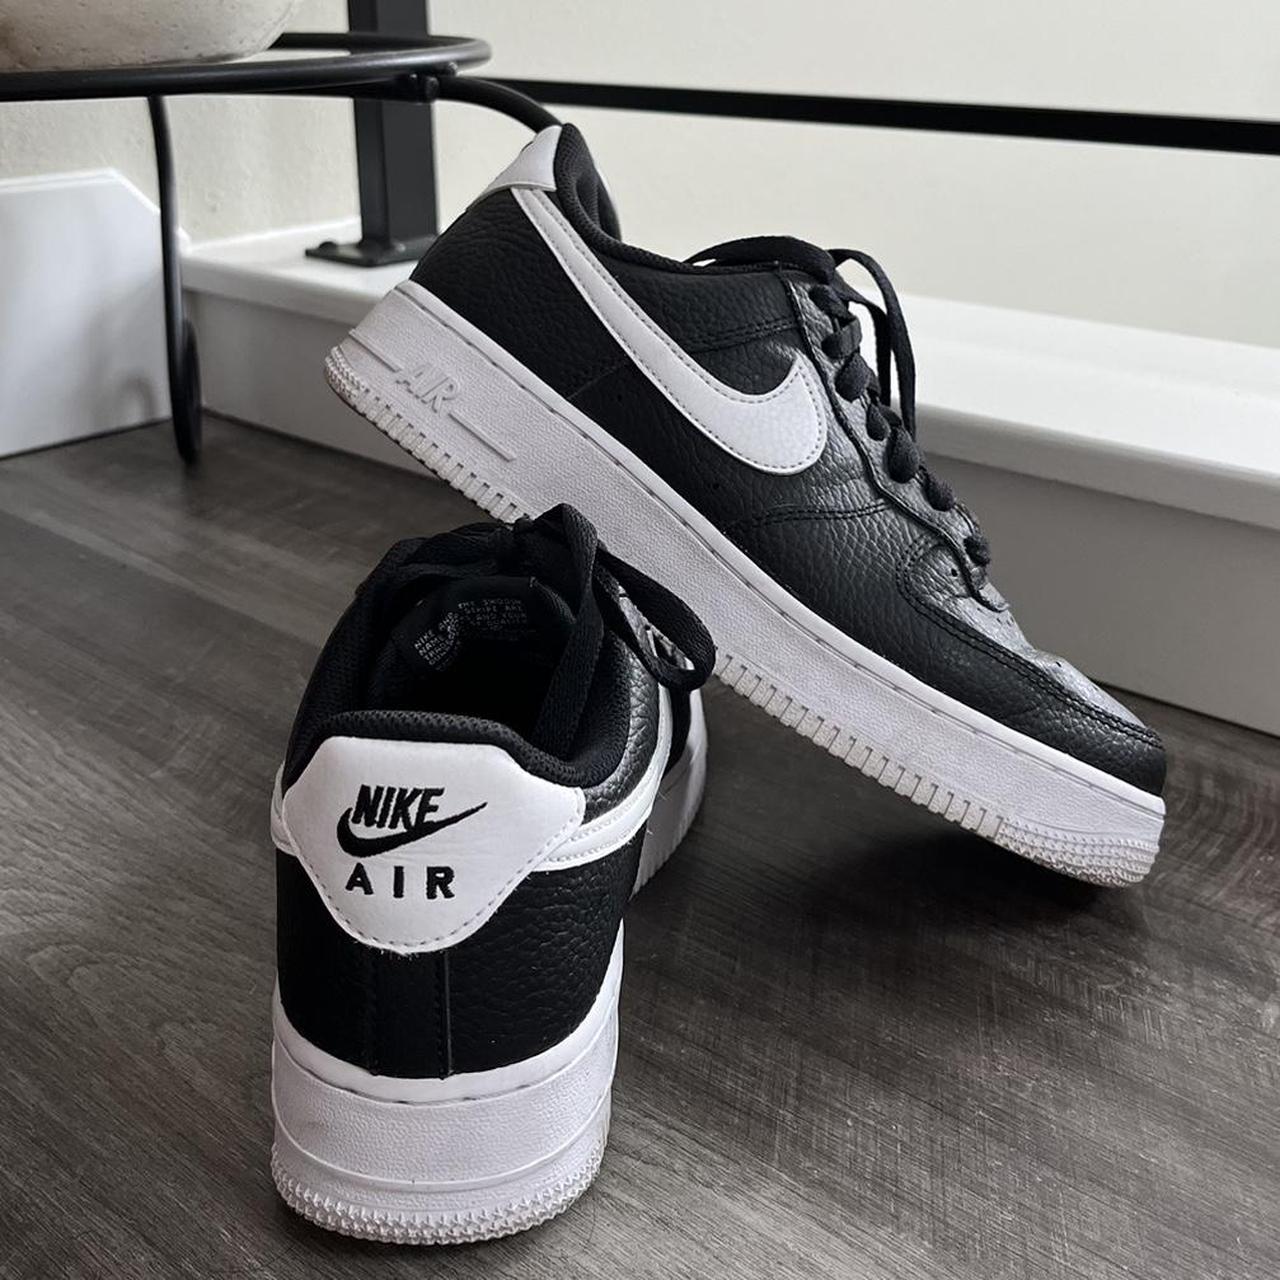 Nike Air Force 1 Lows These are Men's size US6.5!... - Depop